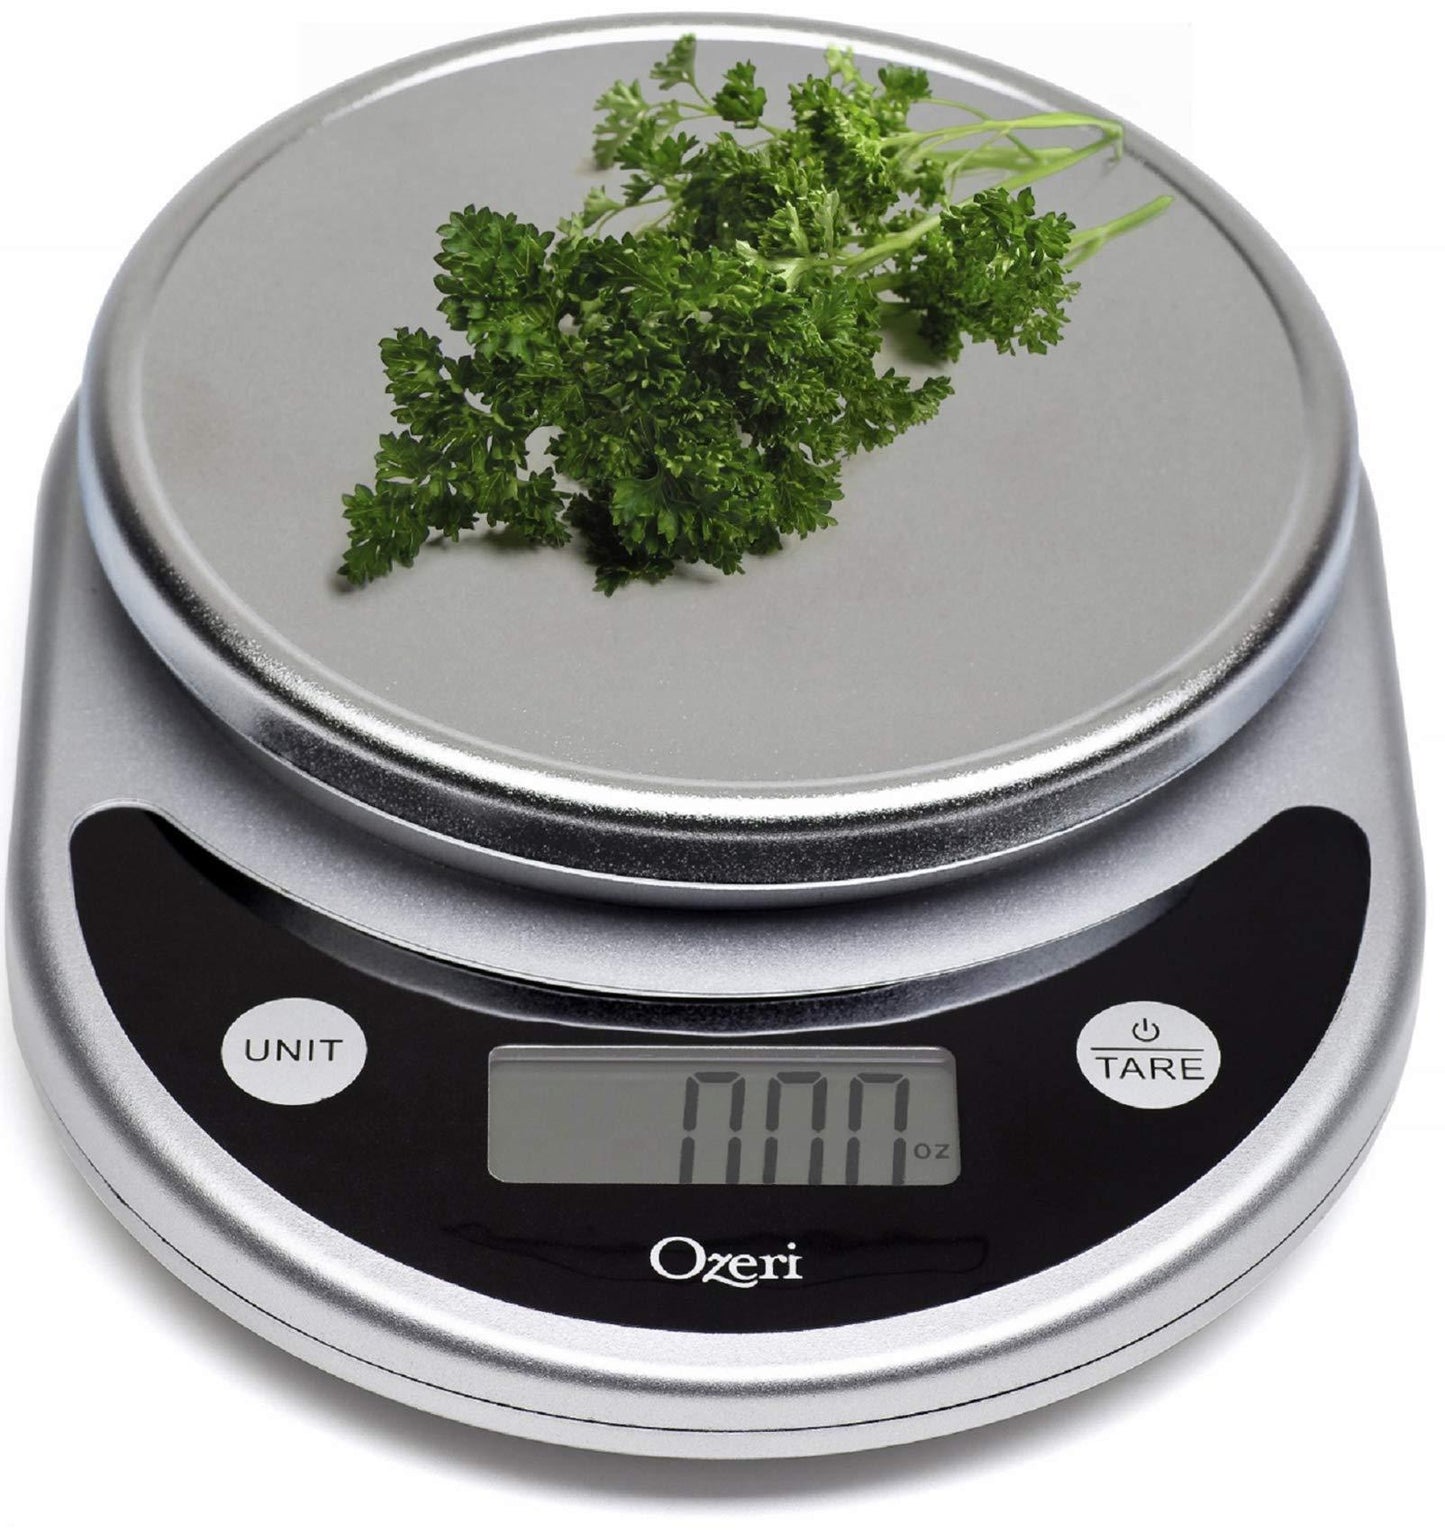 Ozeri Pronto Digital Multifunction Kitchen and Food Scale - CookCave